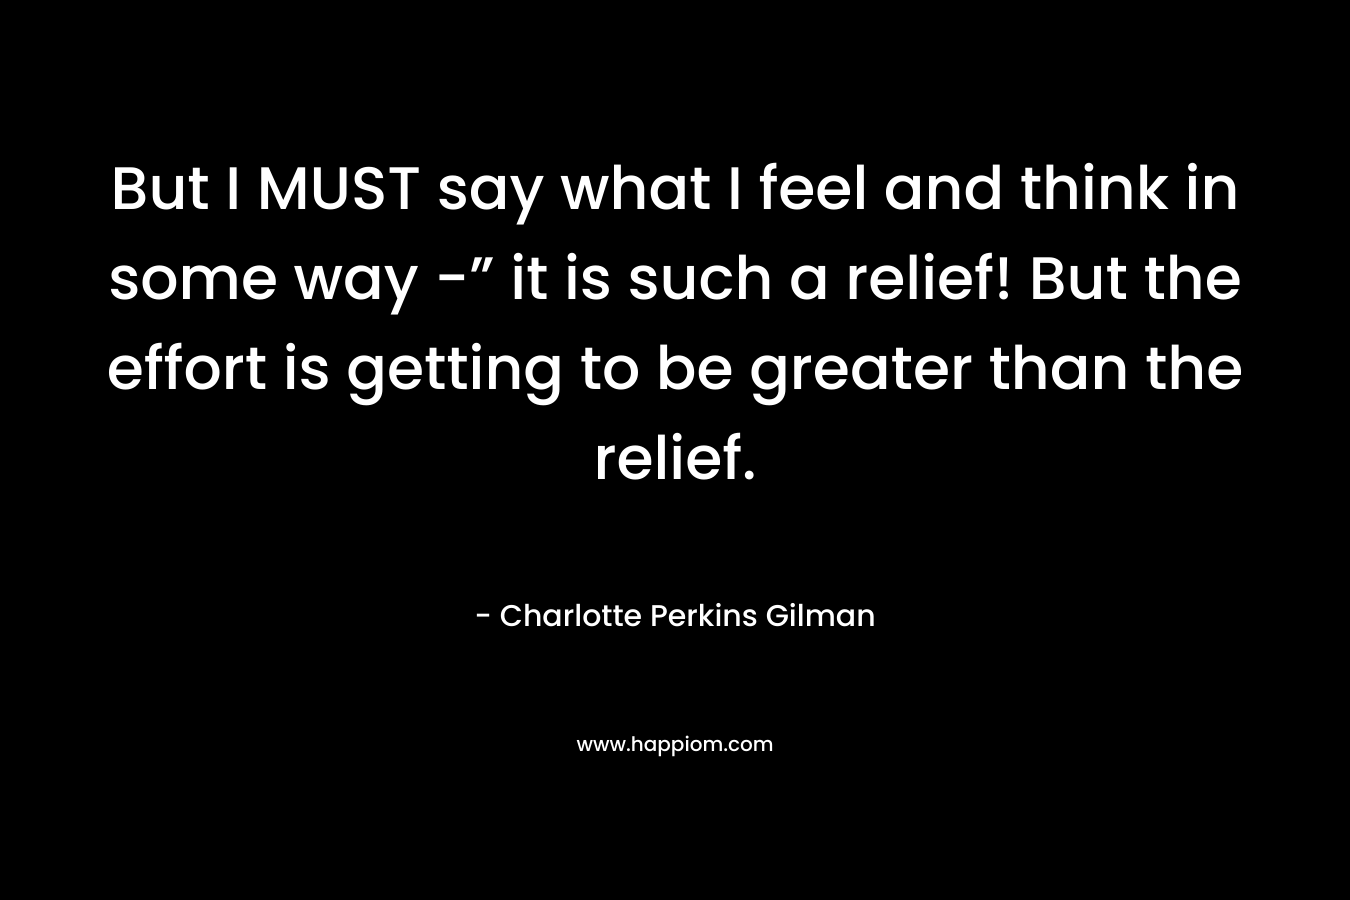 But I MUST say what I feel and think in some way -” it is such a relief! But the effort is getting to be greater than the relief. – Charlotte Perkins Gilman